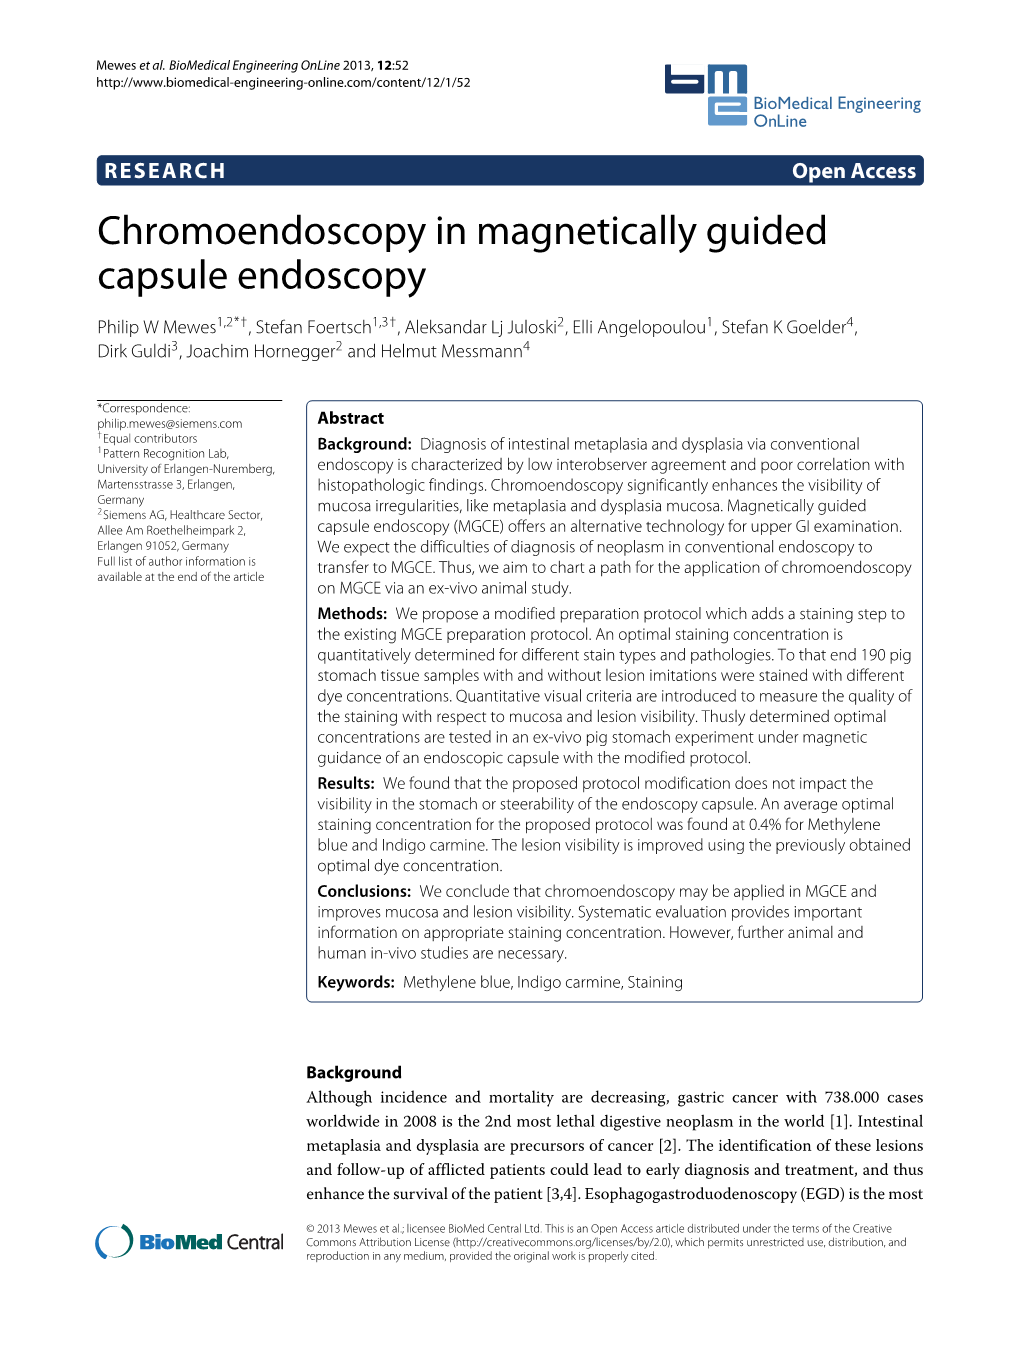 Chromoendoscopy in Magnetically Guided Capsule Endoscopy